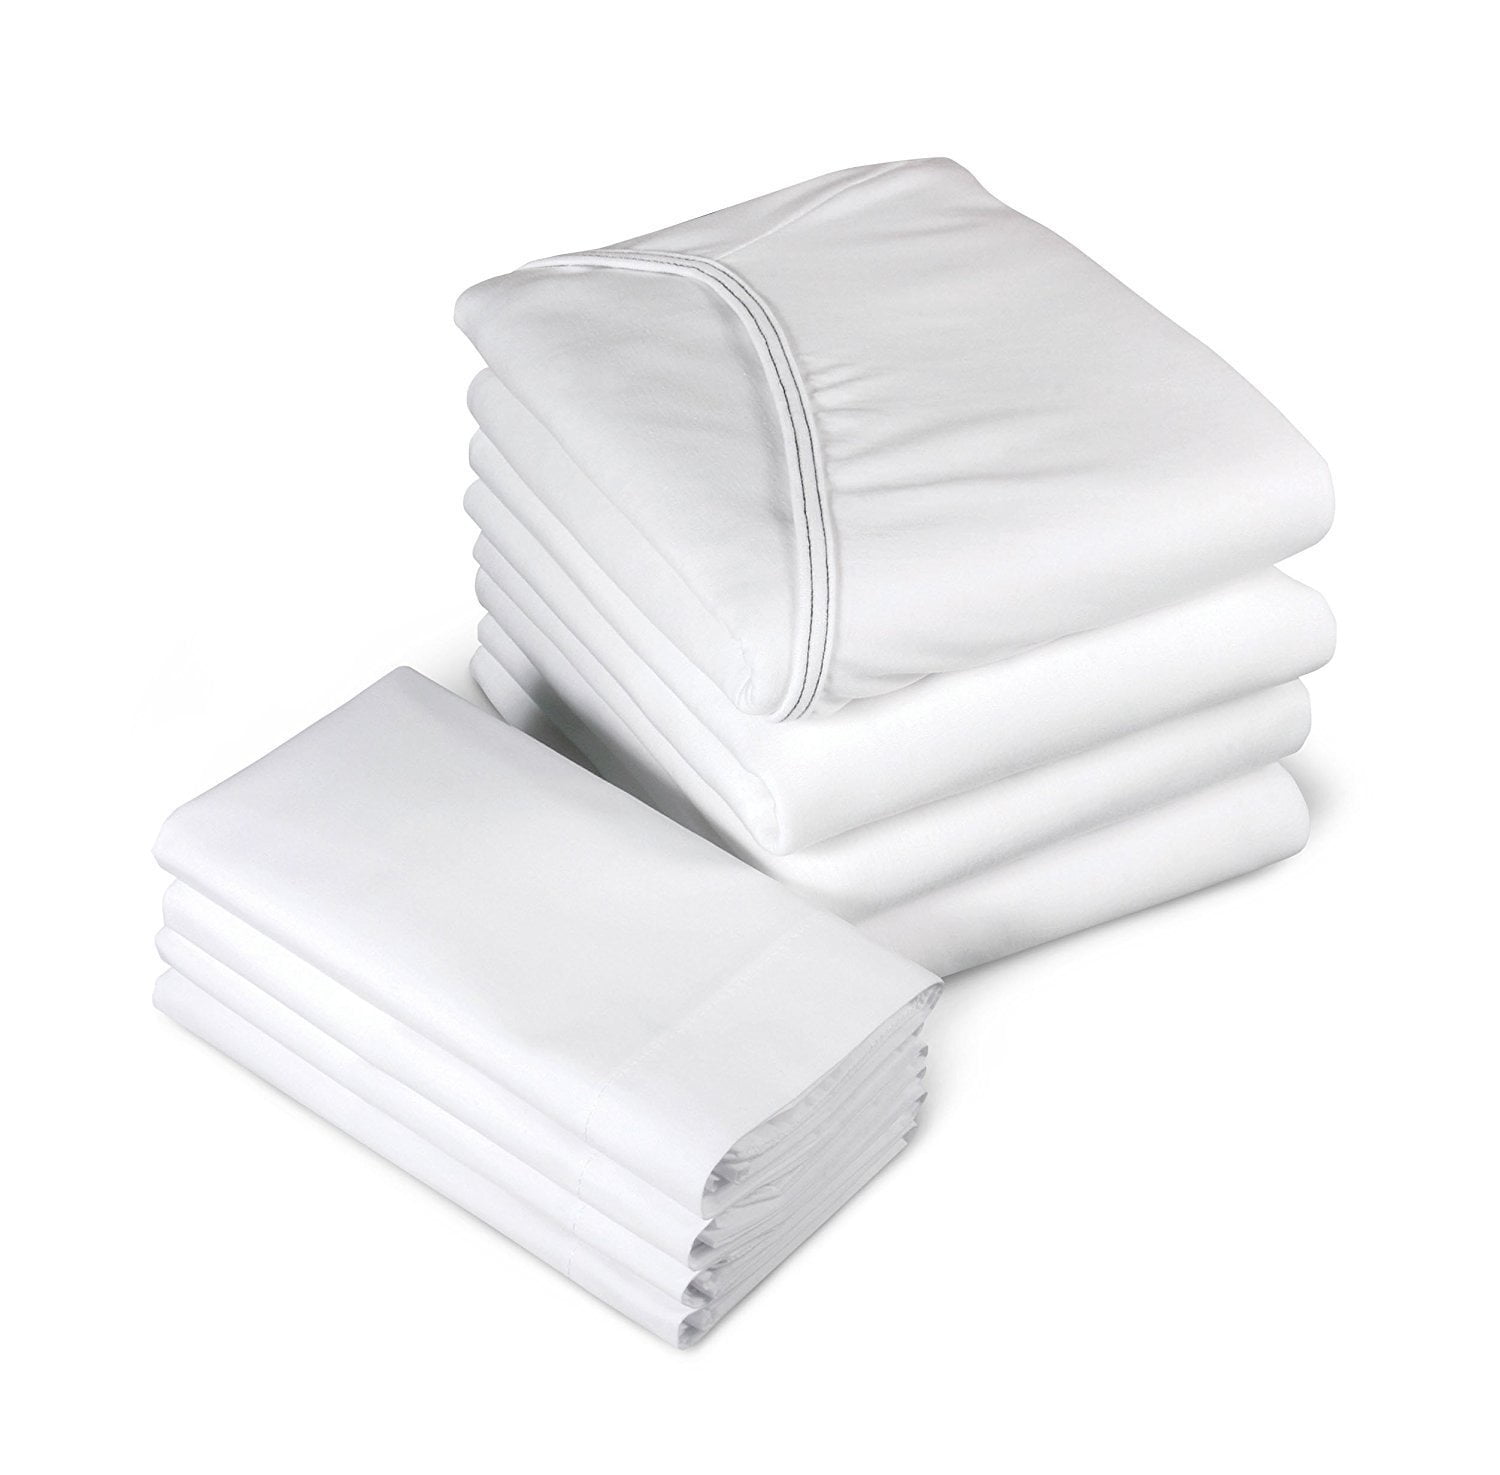 5 PACK premium white contour twin knitted fitted sheets hospital beds 36x84x16 